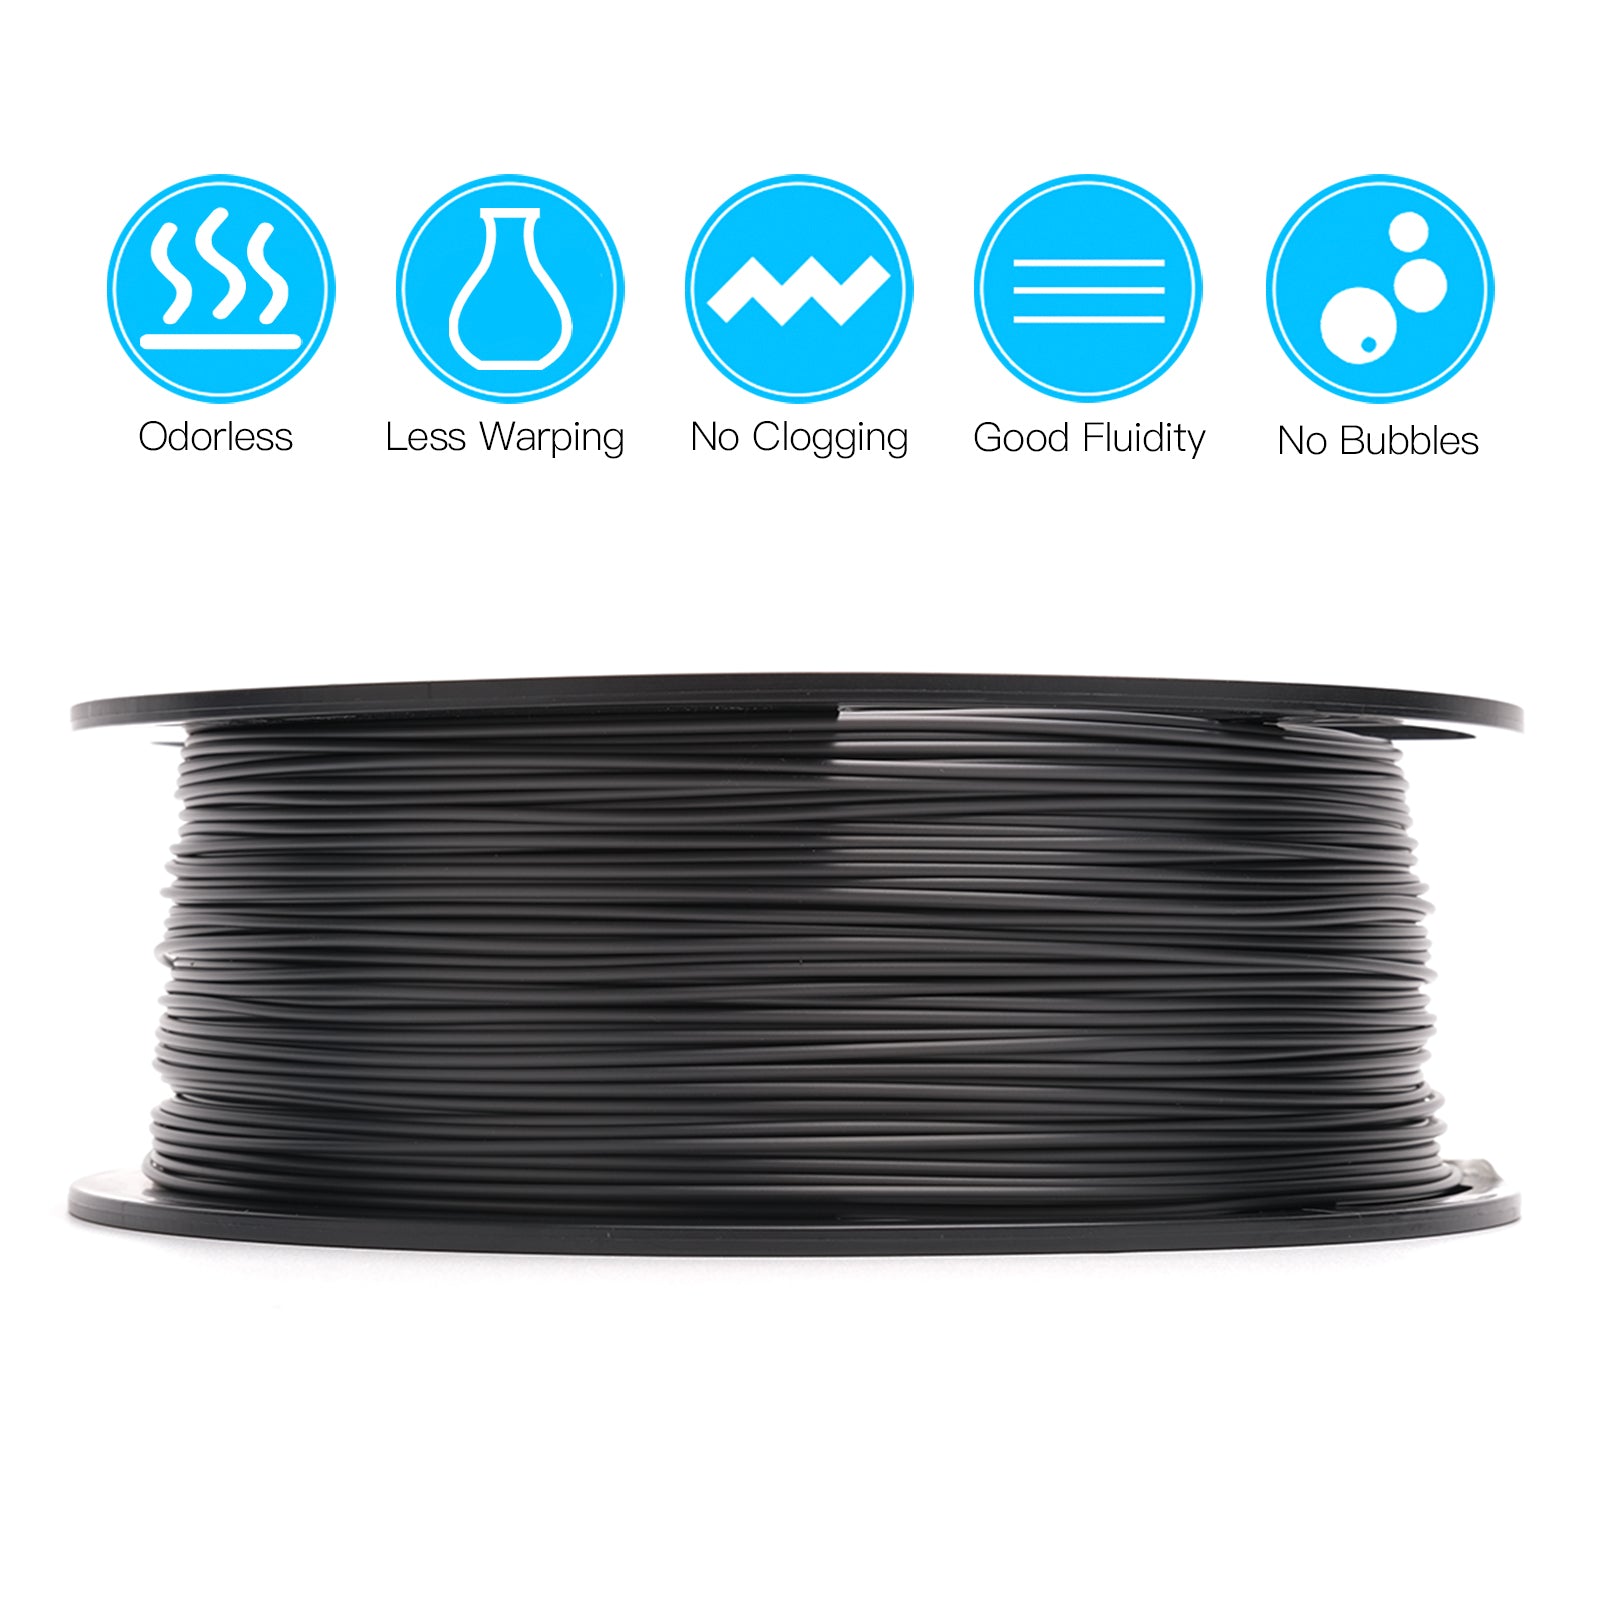 1kg Spool eSUN PLA Gloss Filament 1.75mm diameter Eco-Friendly printing consumables compatible with Creality Artillery Anycubic 3D Printers